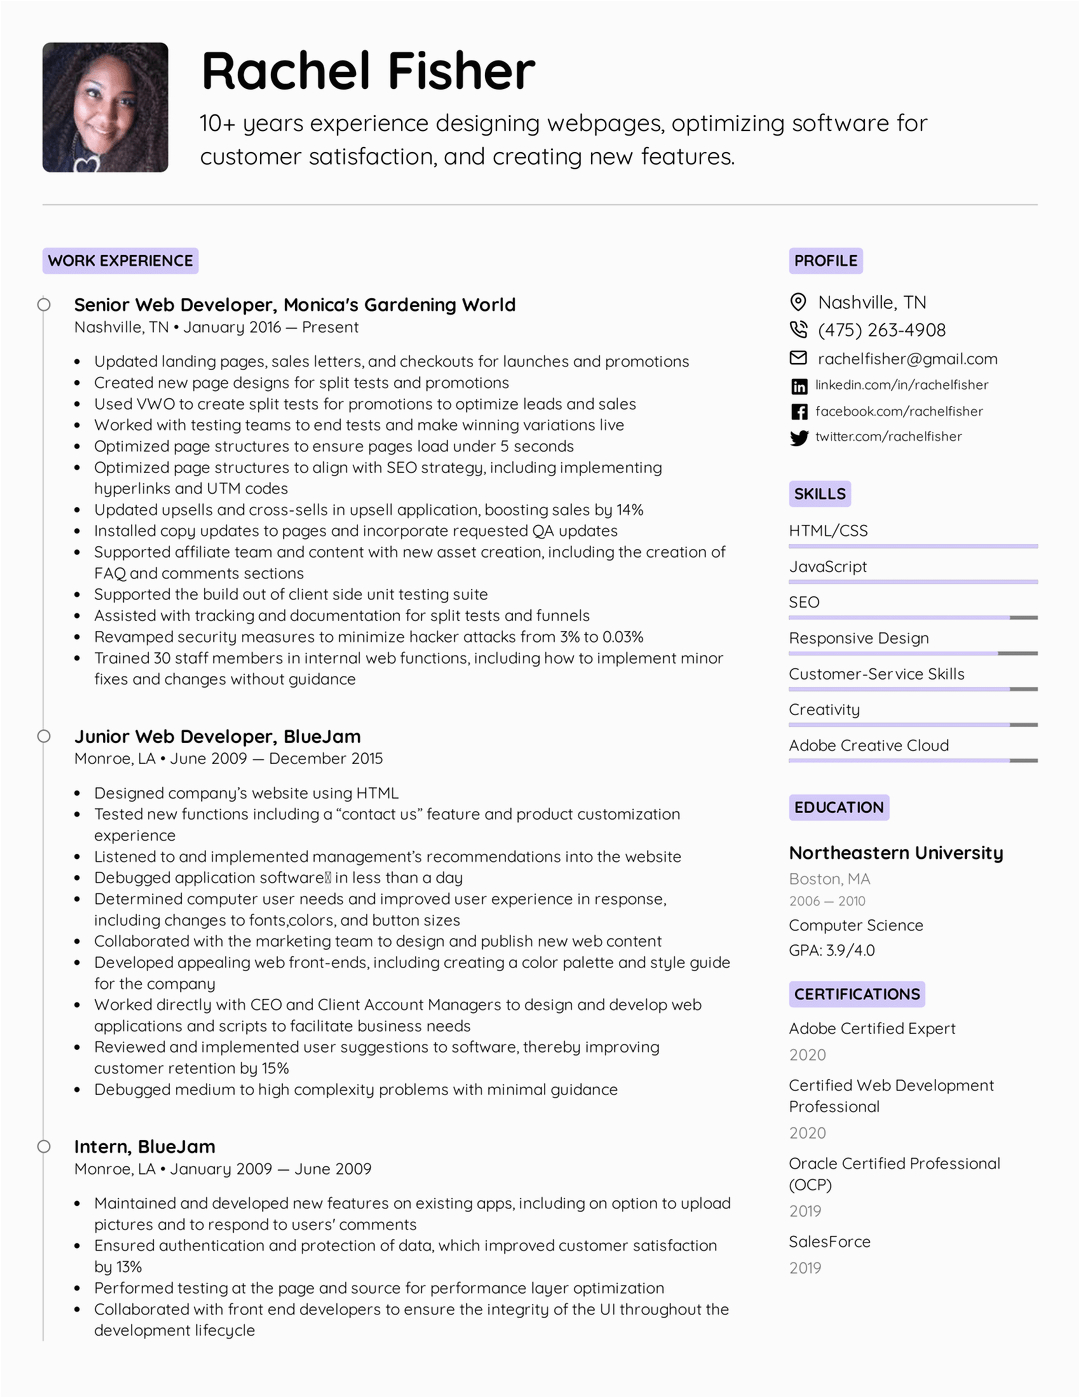 Resume Sample with Strengths and Weaknesses 20 Strengths and Weaknesses for Job Interviews In 2021